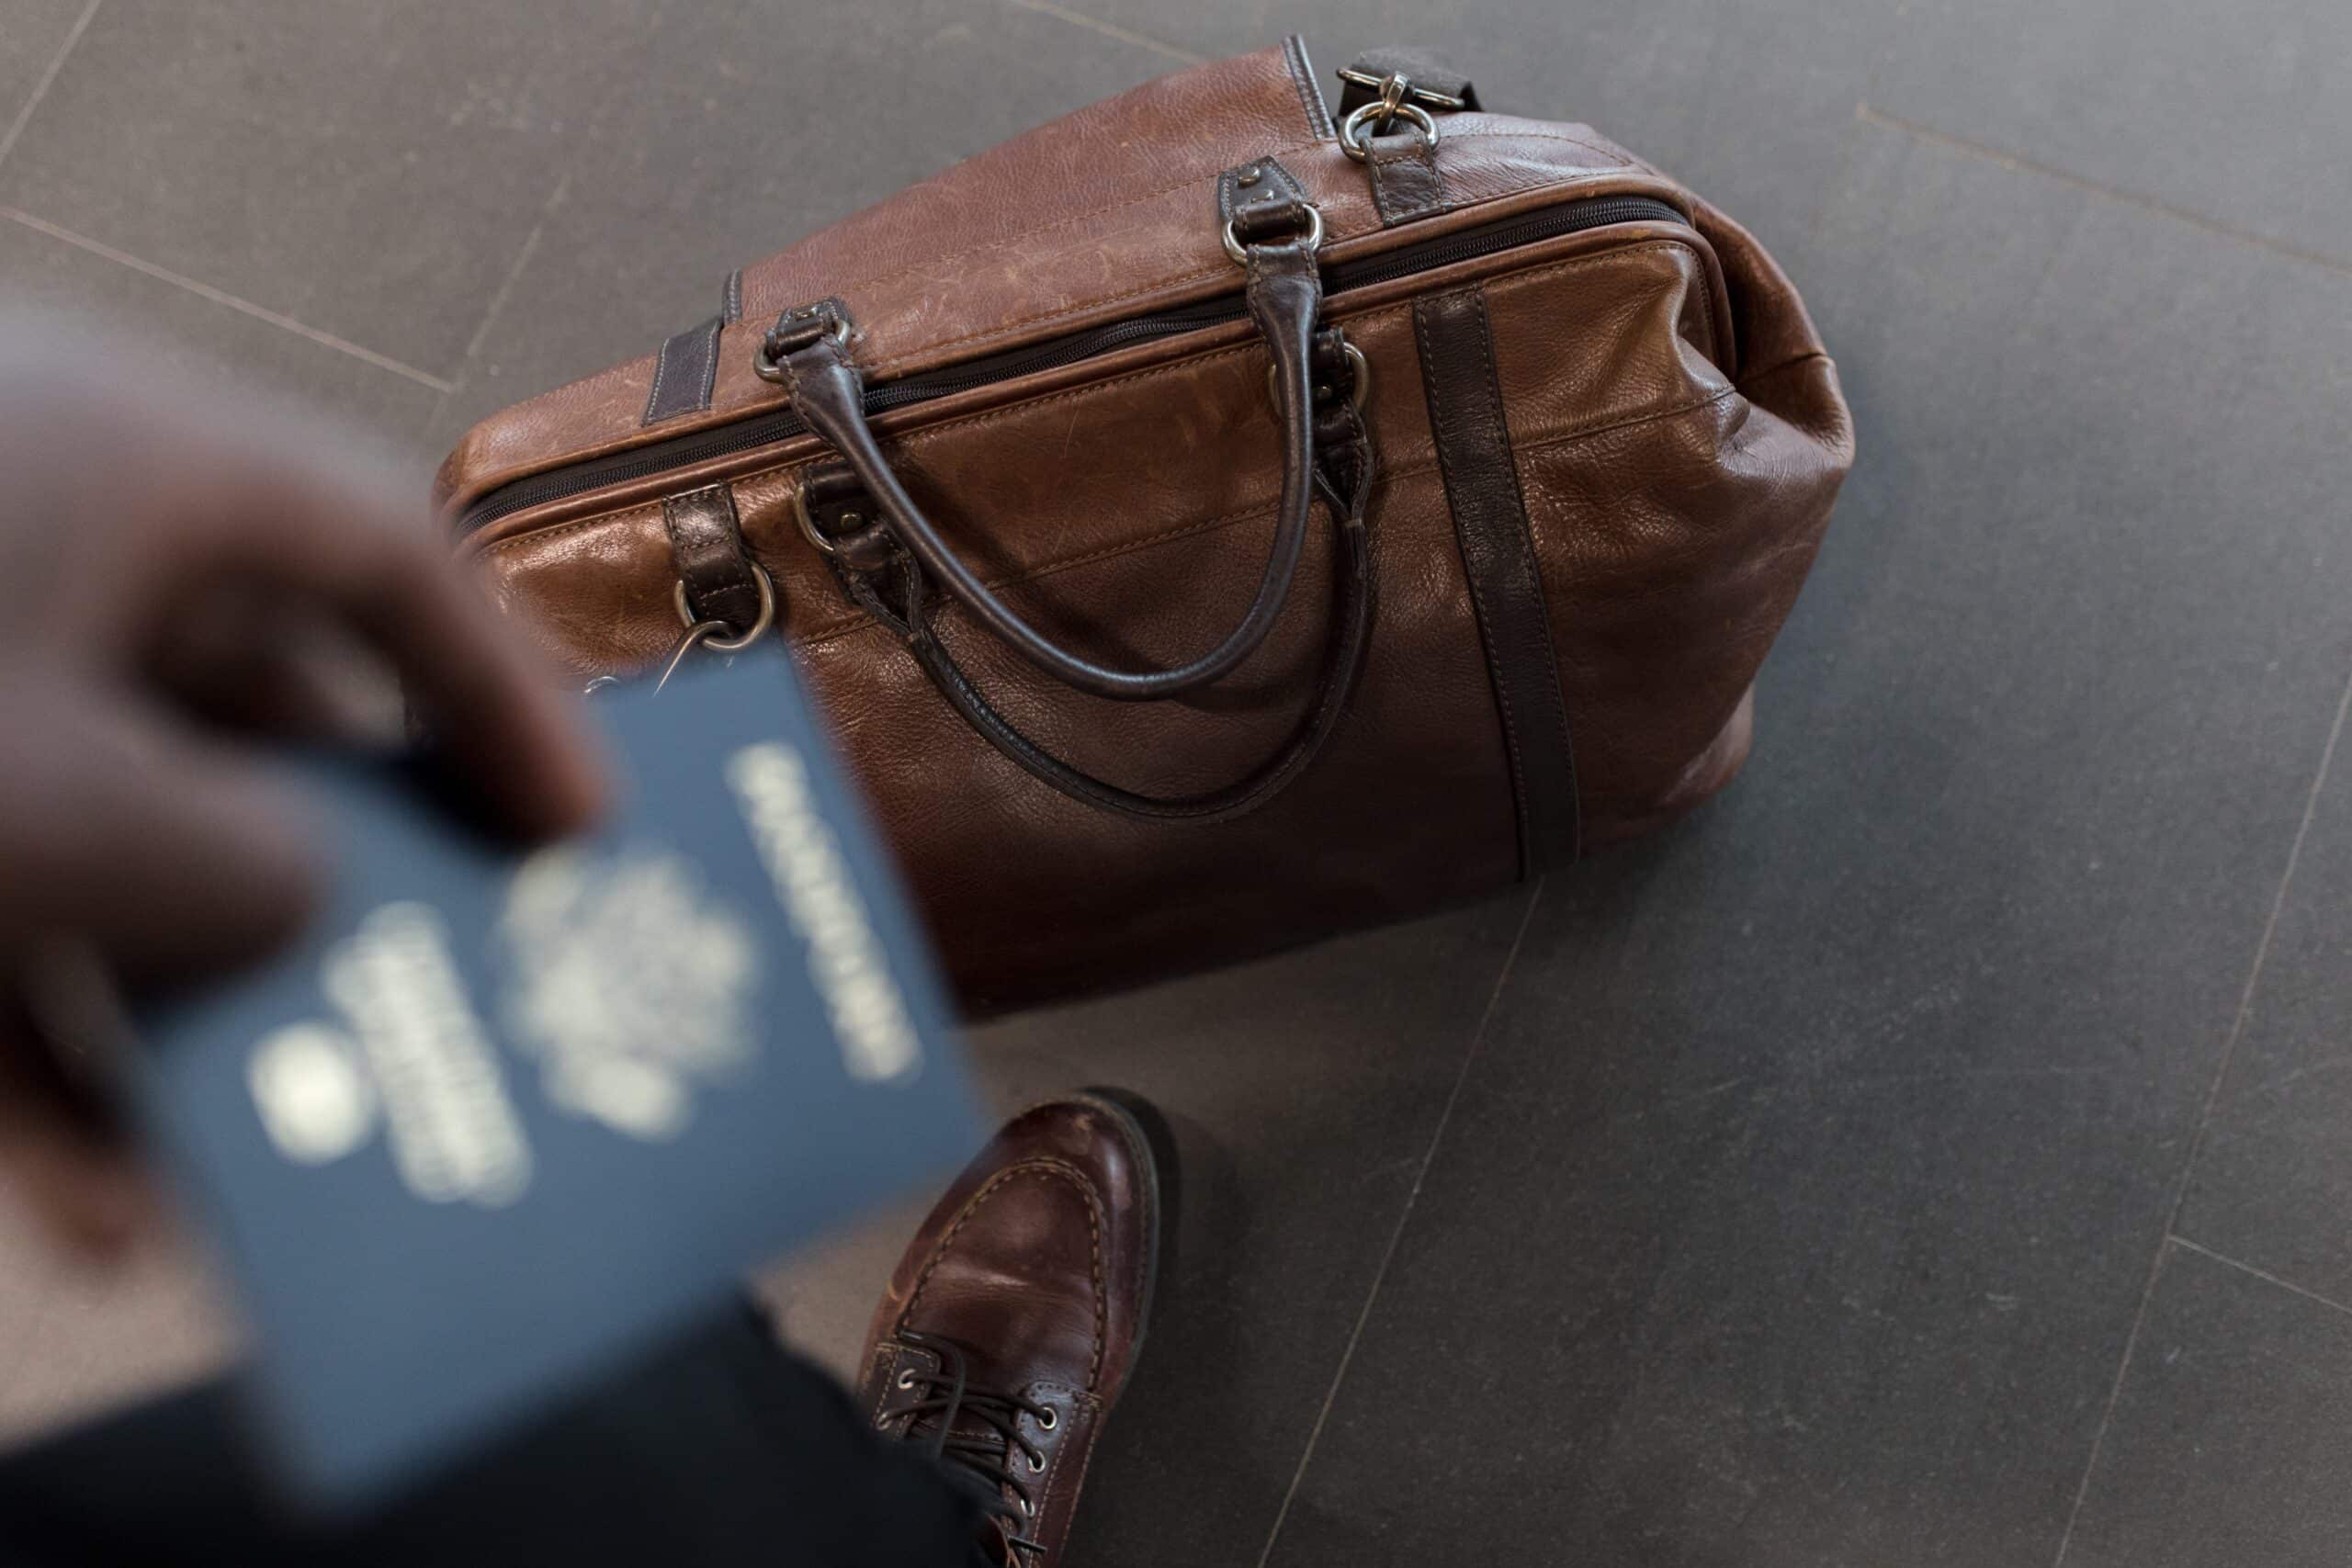 Passport and duffel bag representing changes to the post graduate work permits in Canada